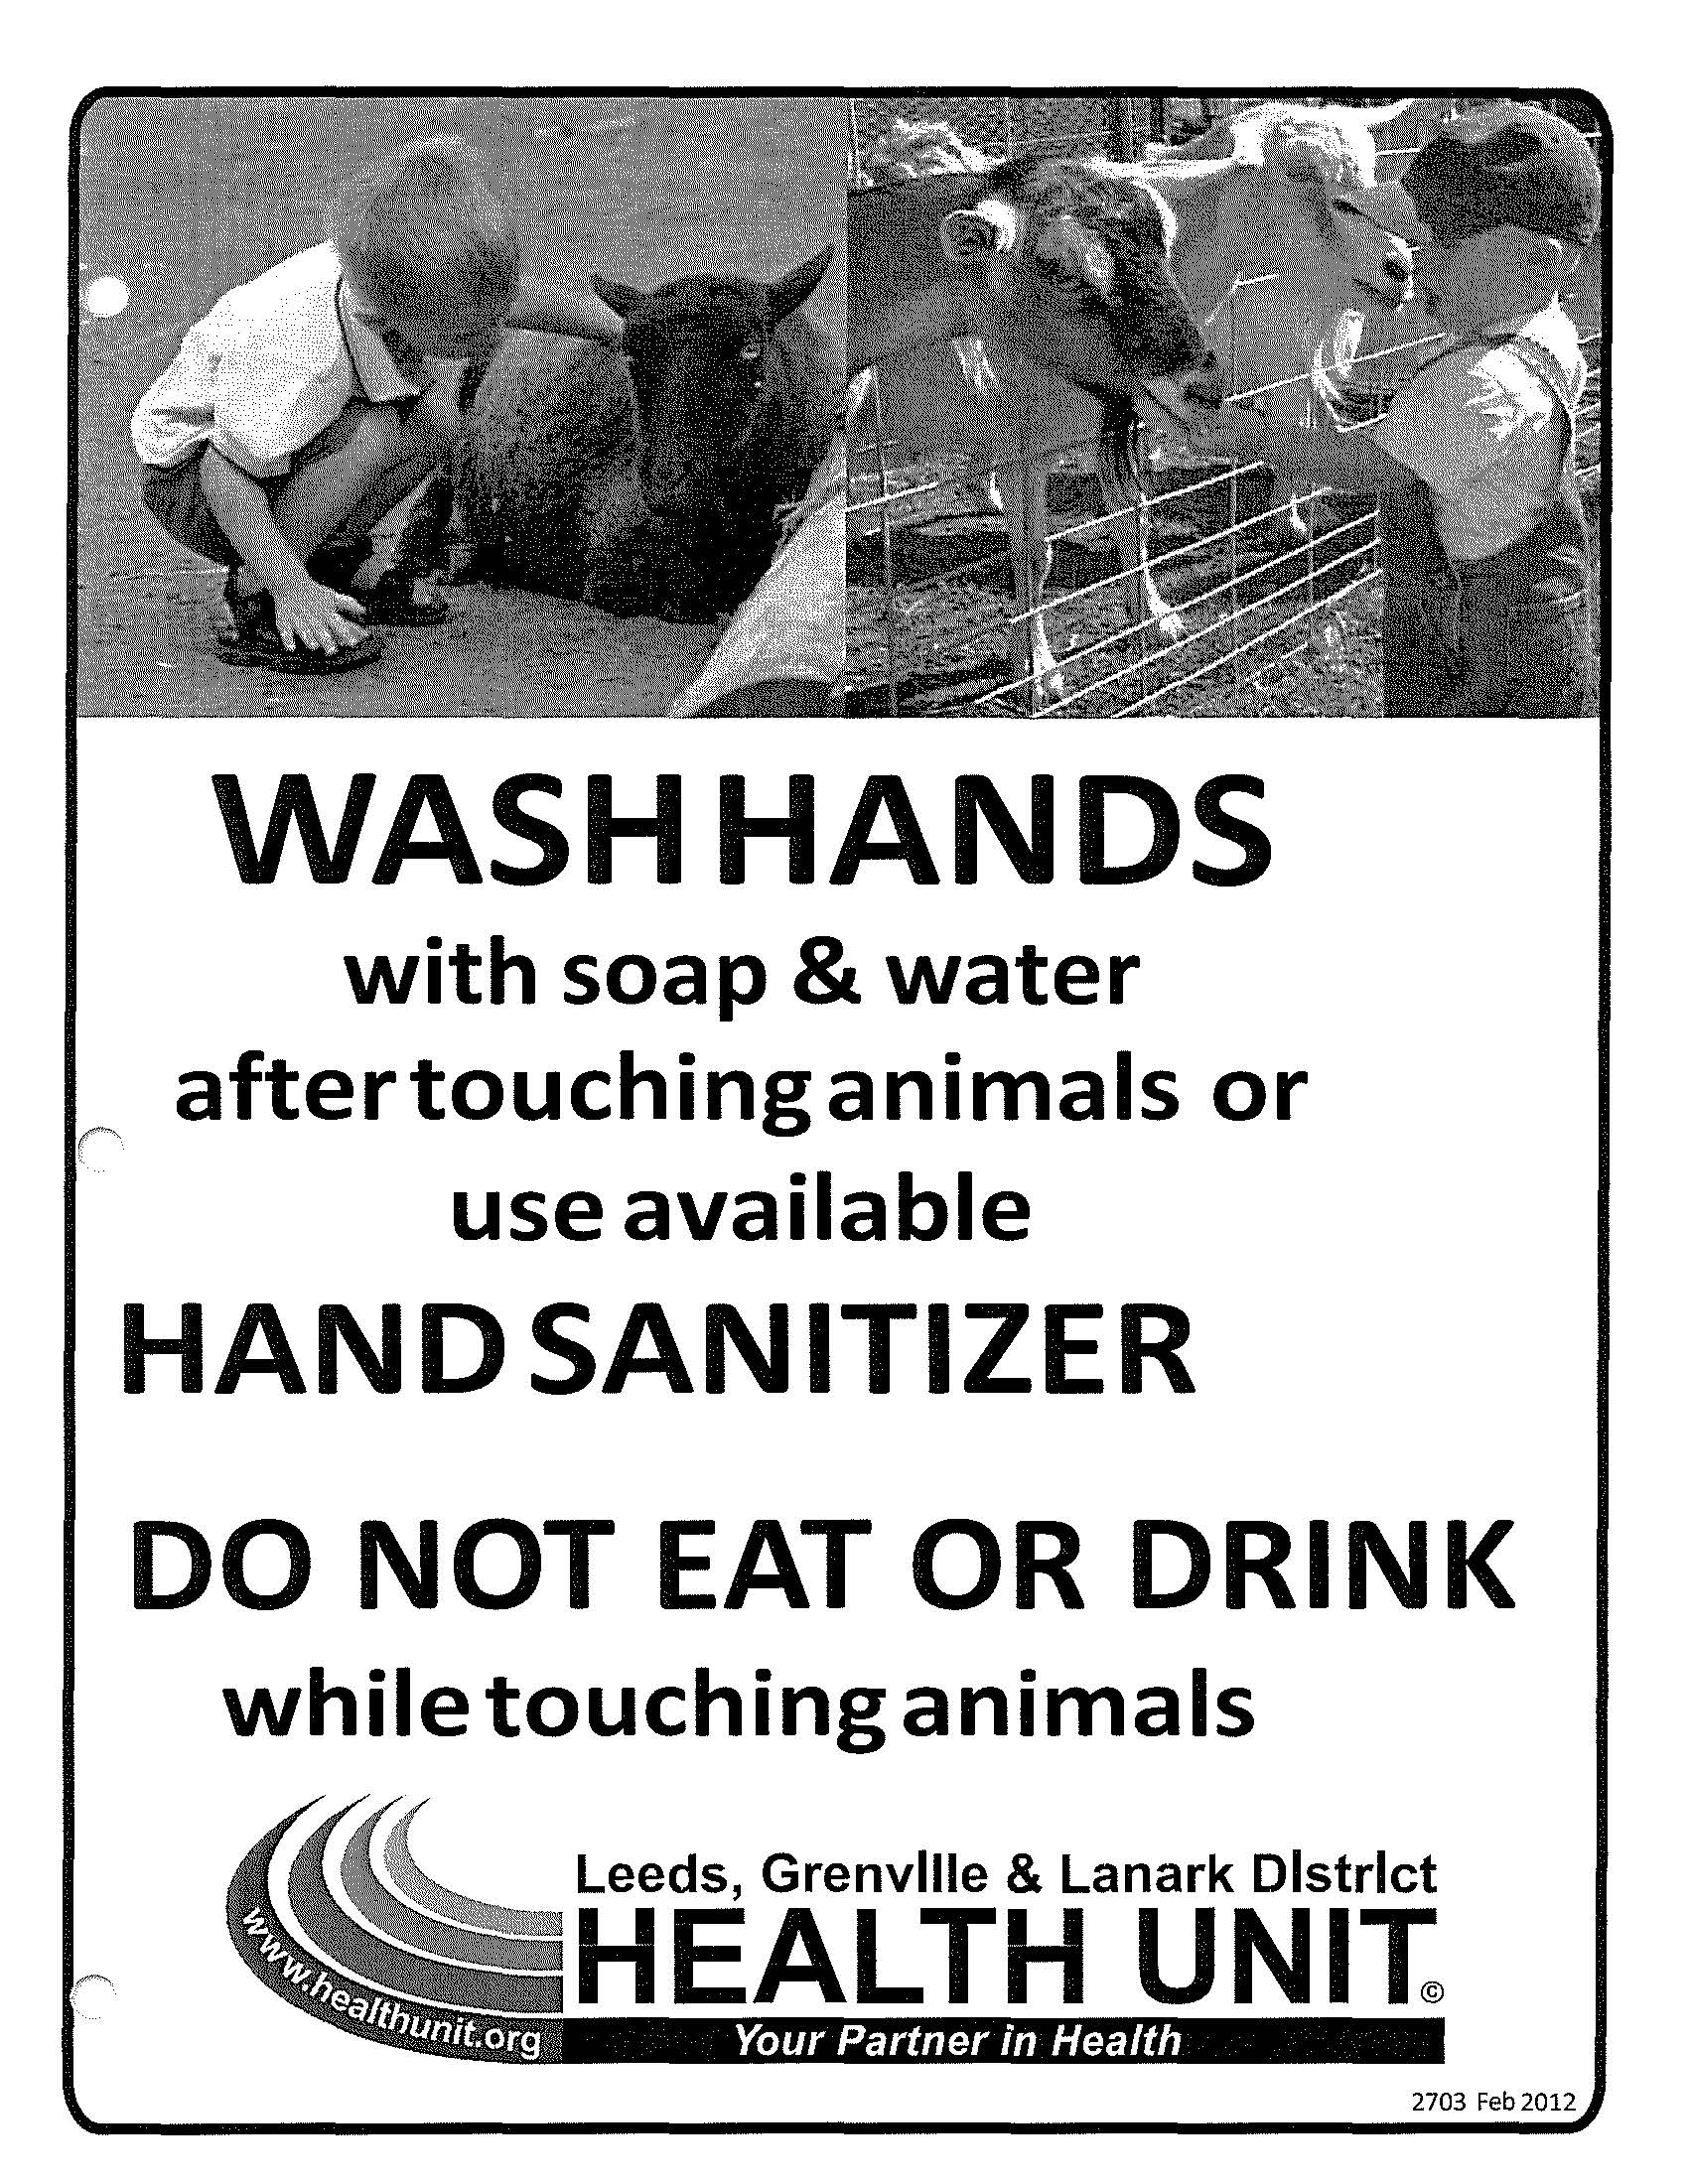 Health Unit Poster reminding people to wash their hands